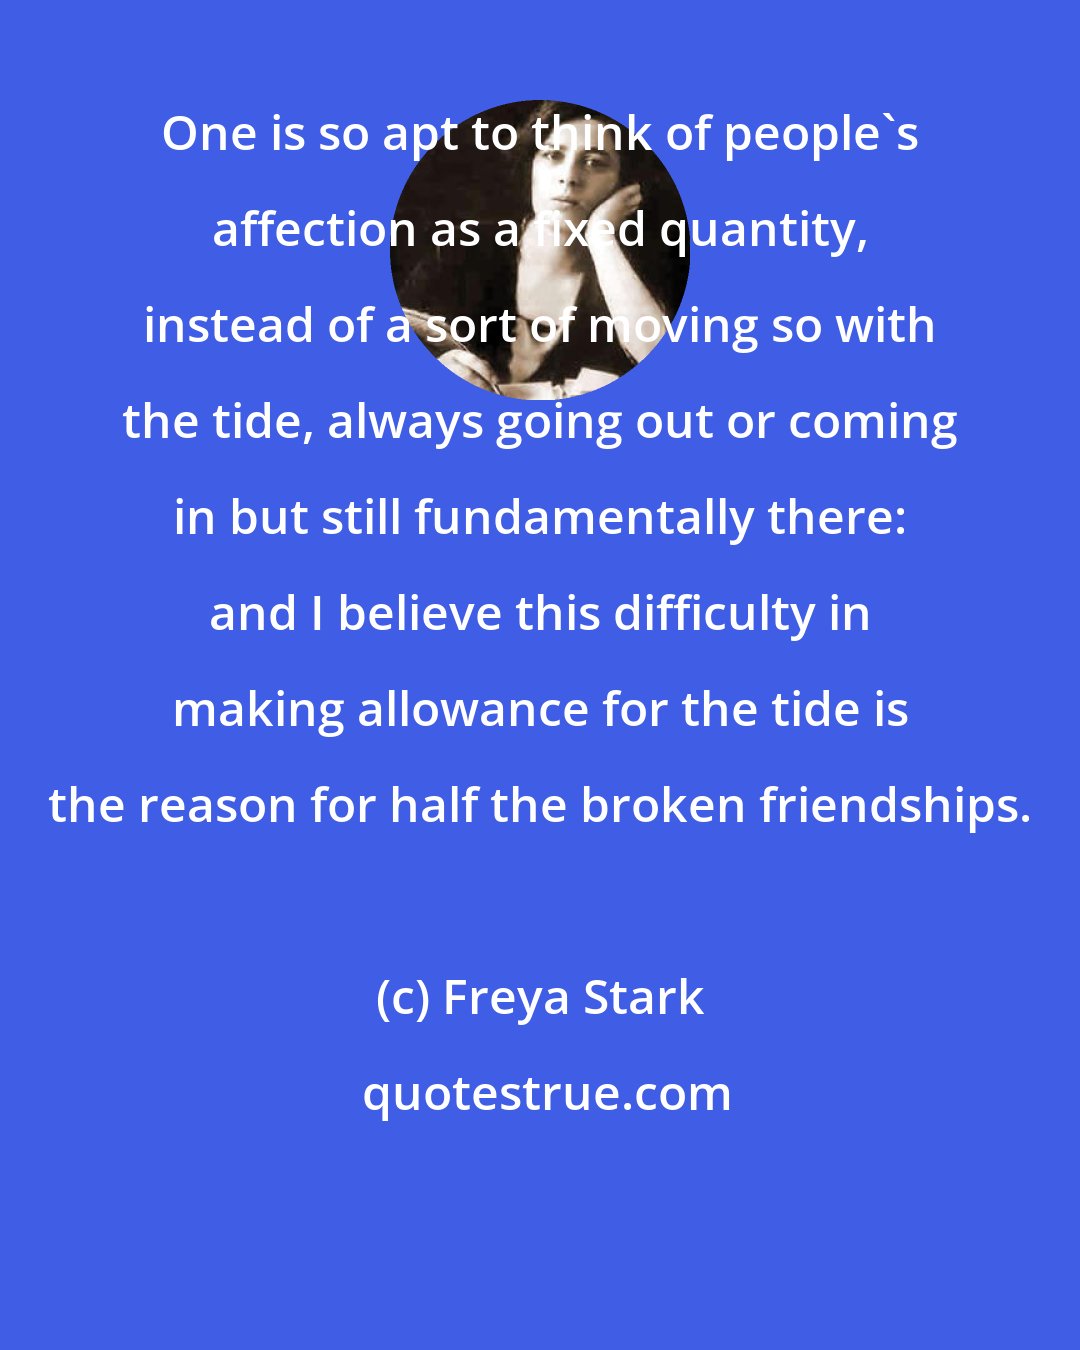 Freya Stark: One is so apt to think of people's affection as a fixed quantity, instead of a sort of moving so with the tide, always going out or coming in but still fundamentally there: and I believe this difficulty in making allowance for the tide is the reason for half the broken friendships.